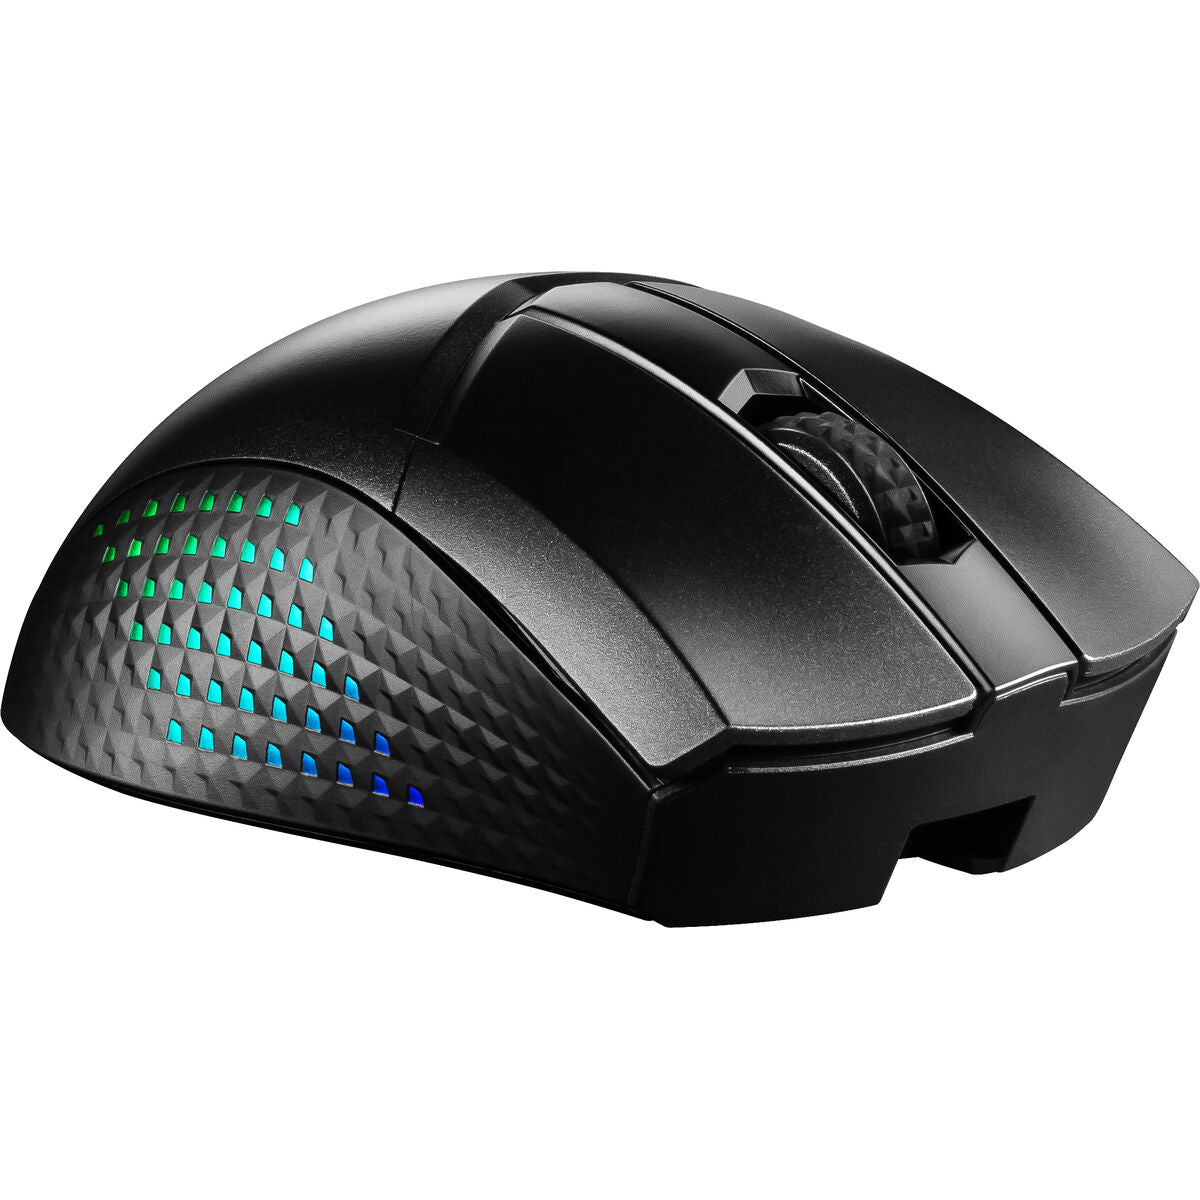 Wireless Mouse MSI CLUTCH GM51 LIGHTWEIGHT, MSI, Computing, Accessories, wireless-mouse-msi-clutch-gm51-lightweight, Brand_MSI, category-reference-2609, category-reference-2642, category-reference-2656, category-reference-t-19685, category-reference-t-19908, category-reference-t-21353, computers / peripherals, Condition_NEW, office, Price_100 - 200, Teleworking, RiotNook